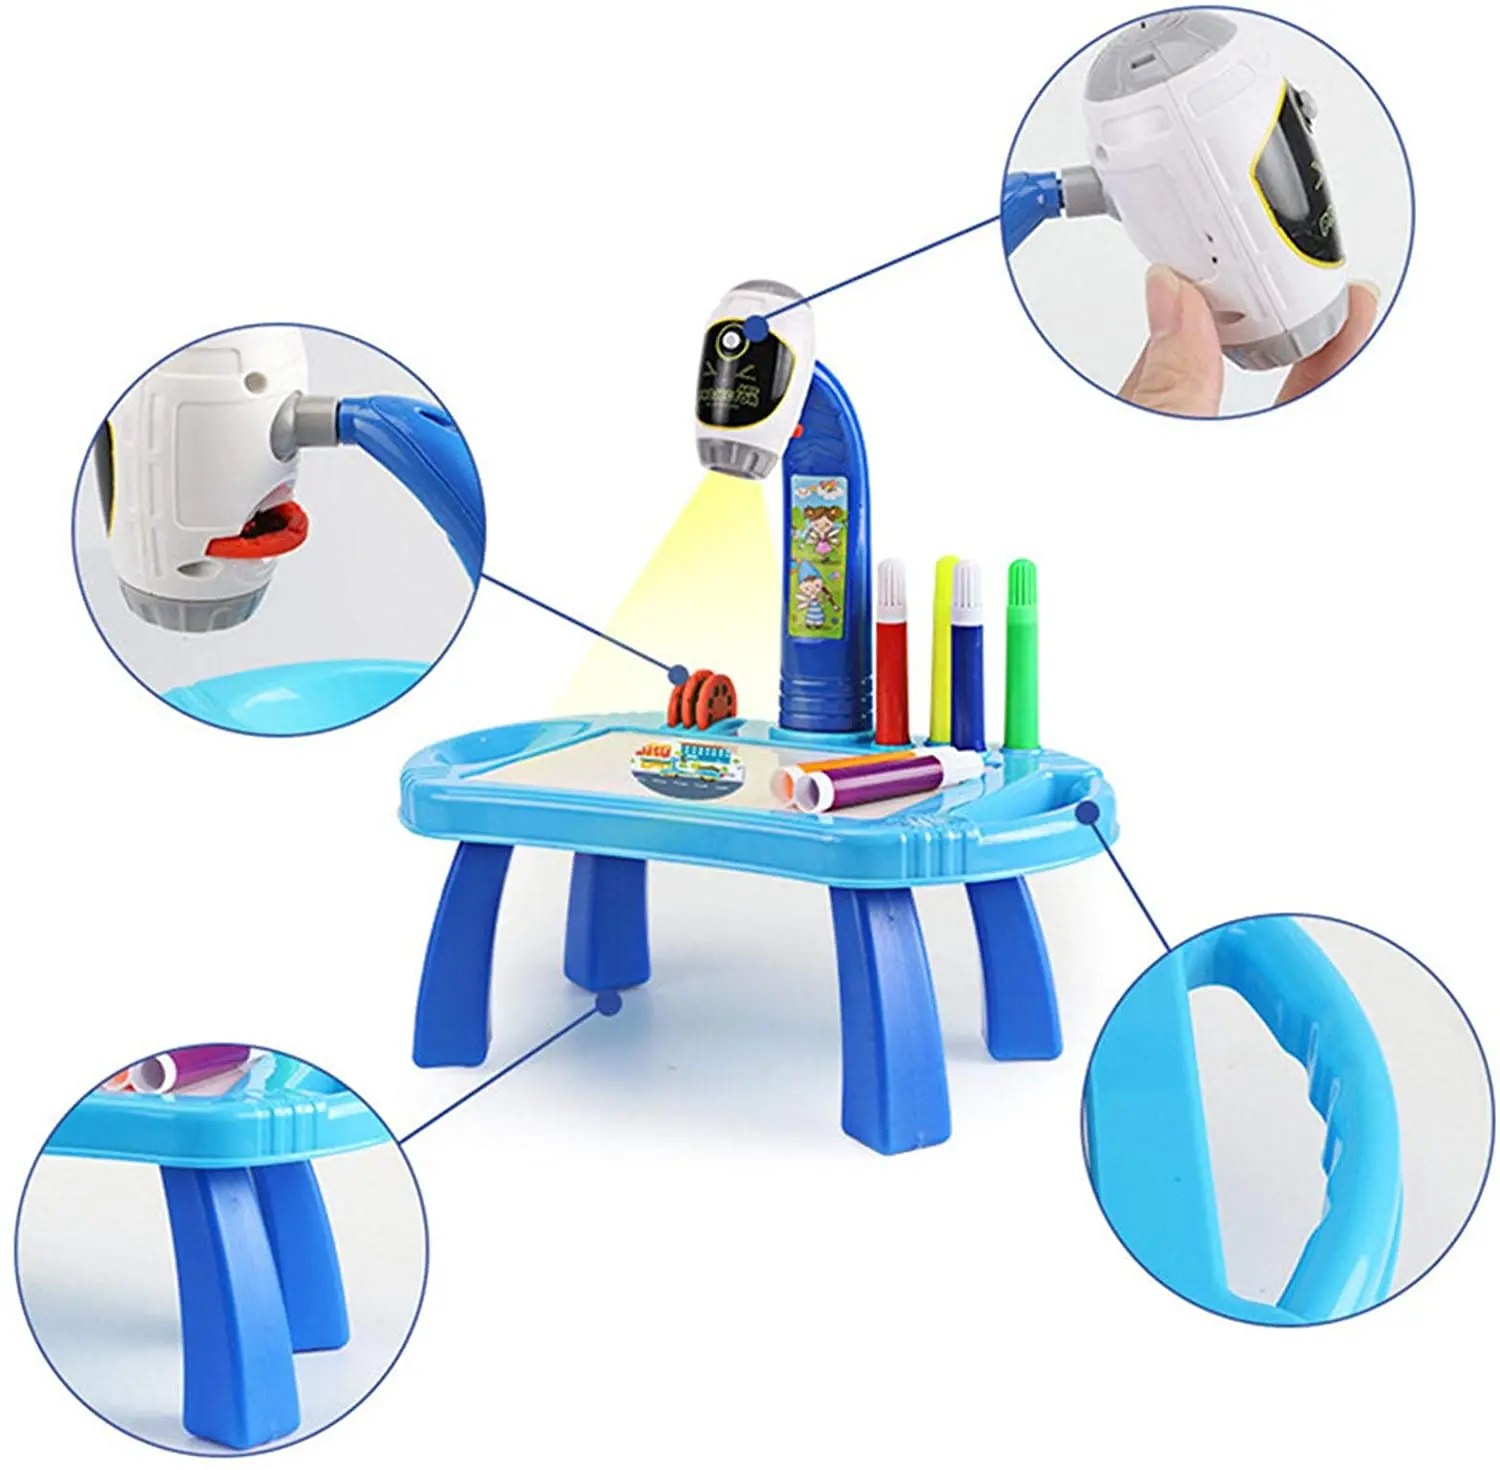 LED Projector Painting & Drawing Table for Kids